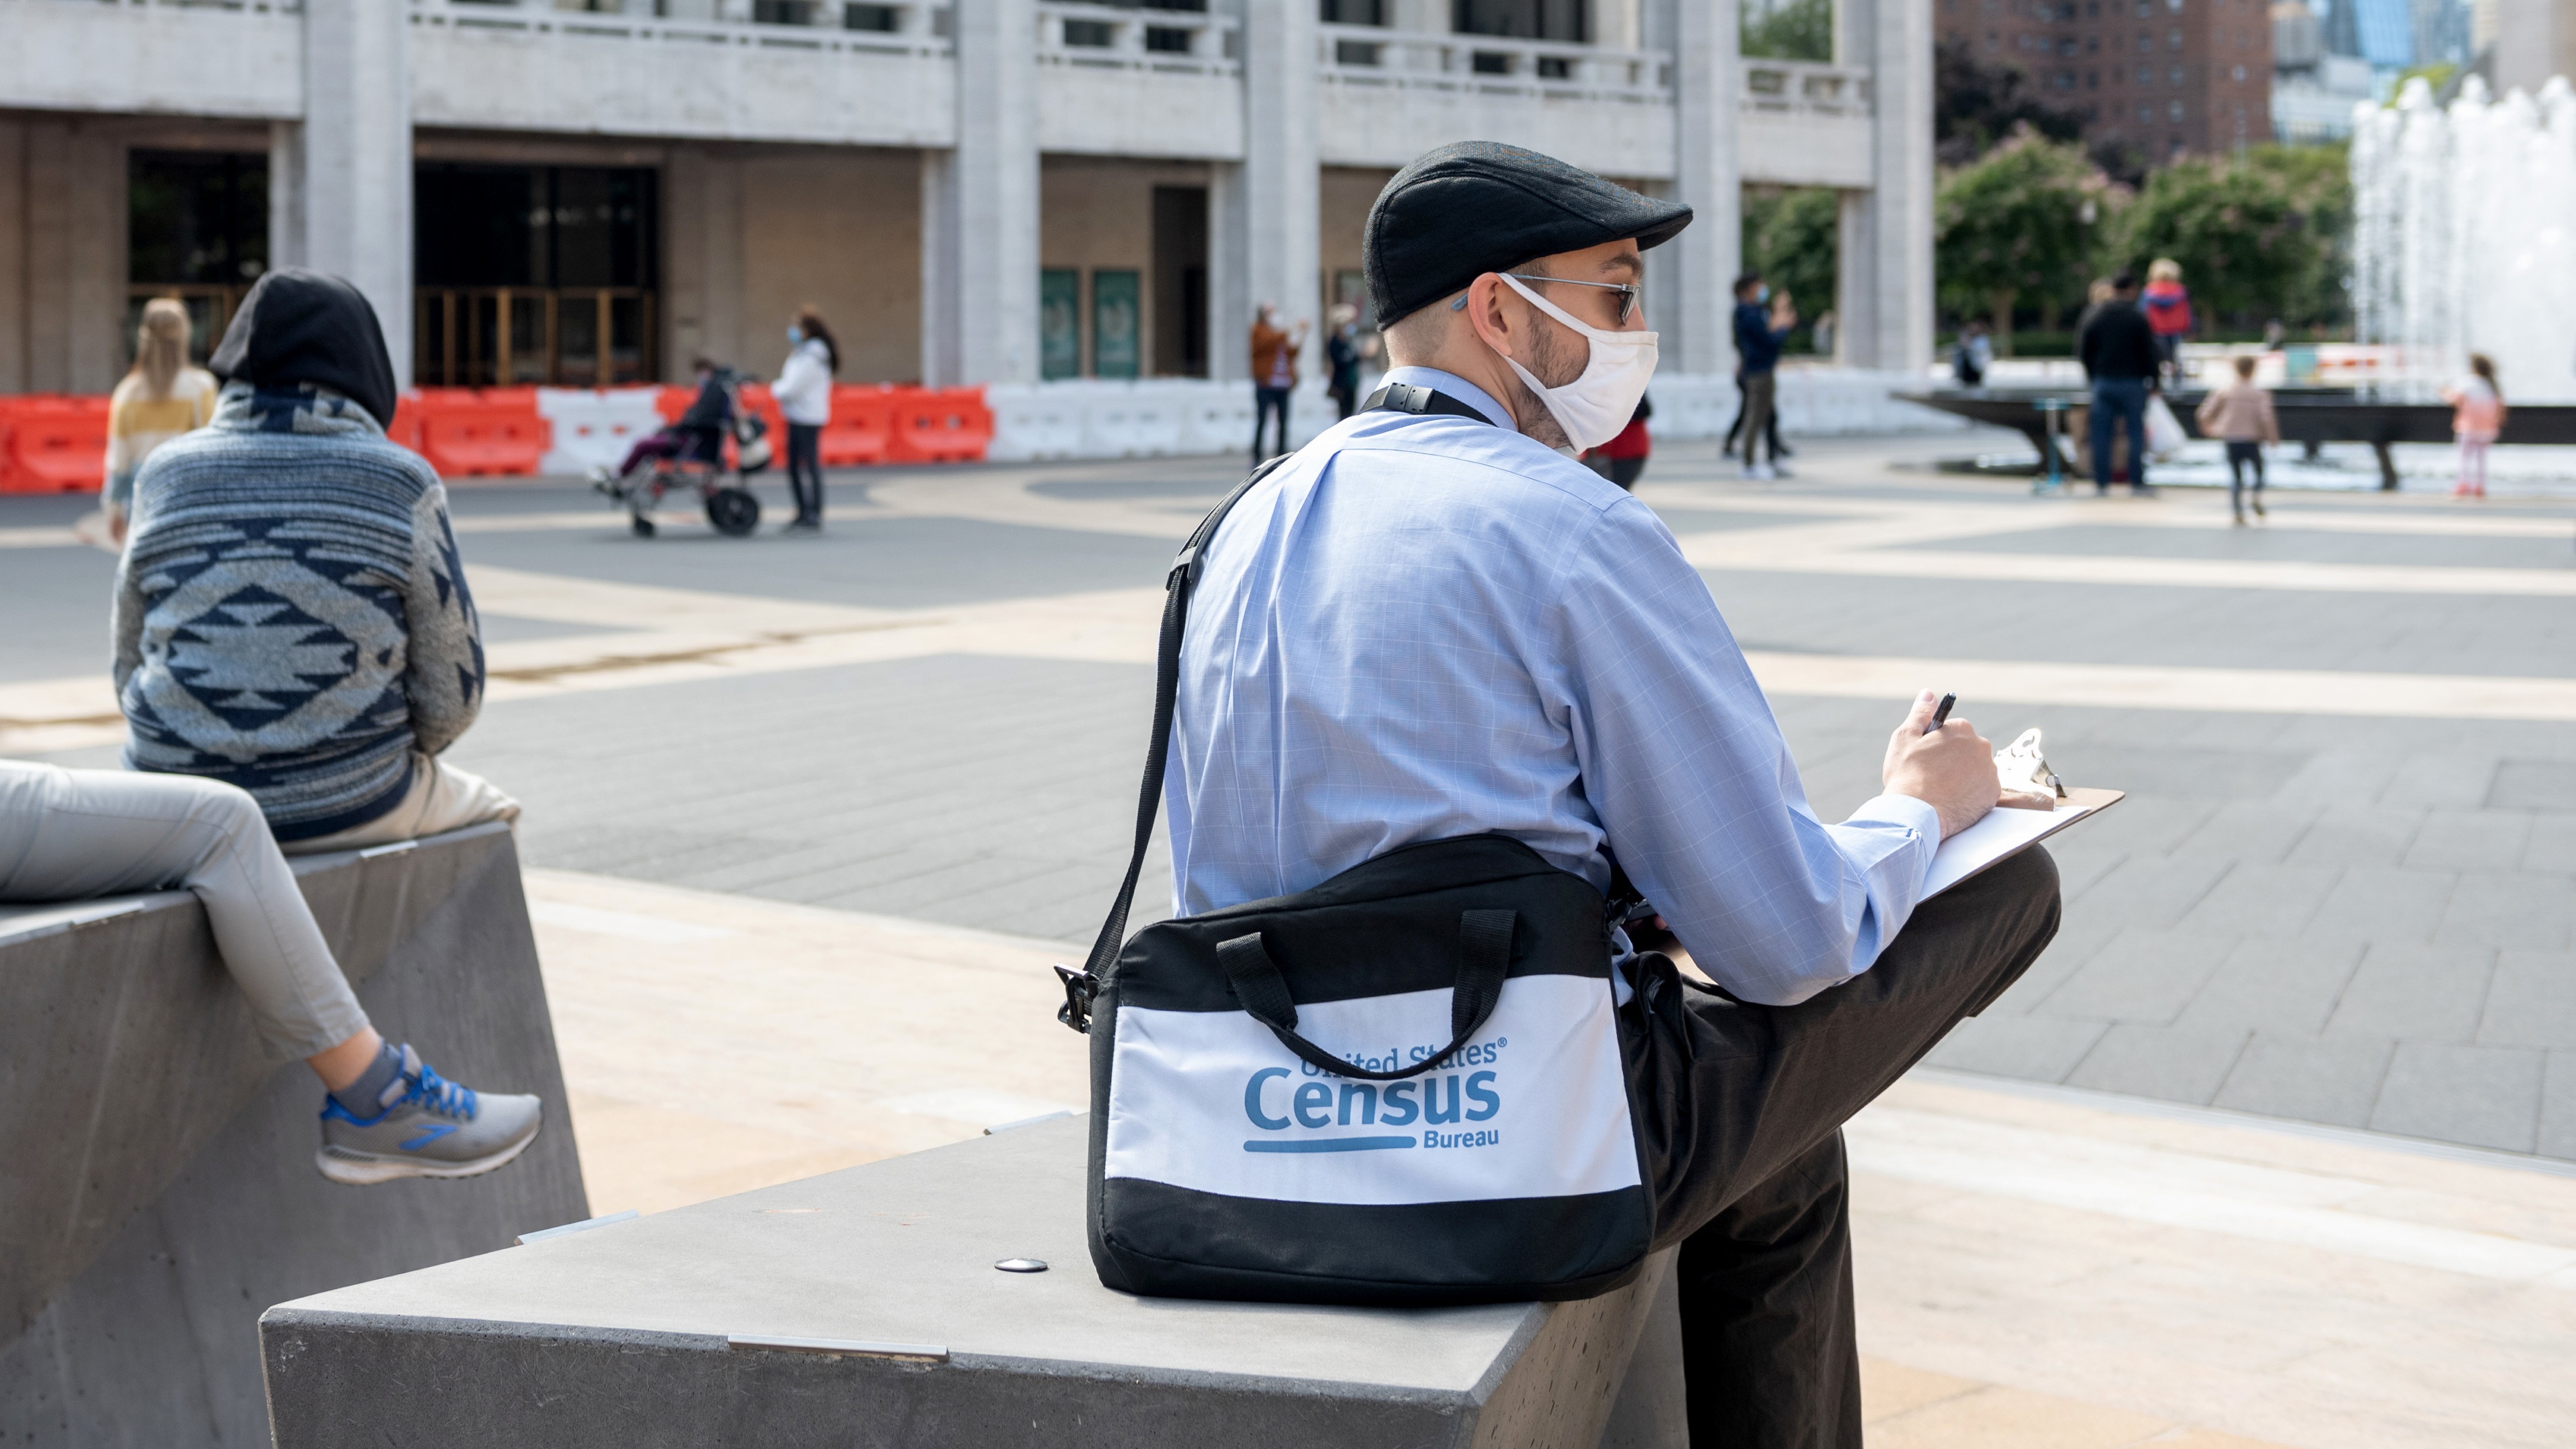 A U.S. census worker sits in the plaza of the Lincoln Center for the Performing Arts in New York City in September. The Census Bureau announced Wednesday that the first results of the 2020 census are expected to be released by April 30. CREDIT: Alexi Rosenfeld/Getty Images